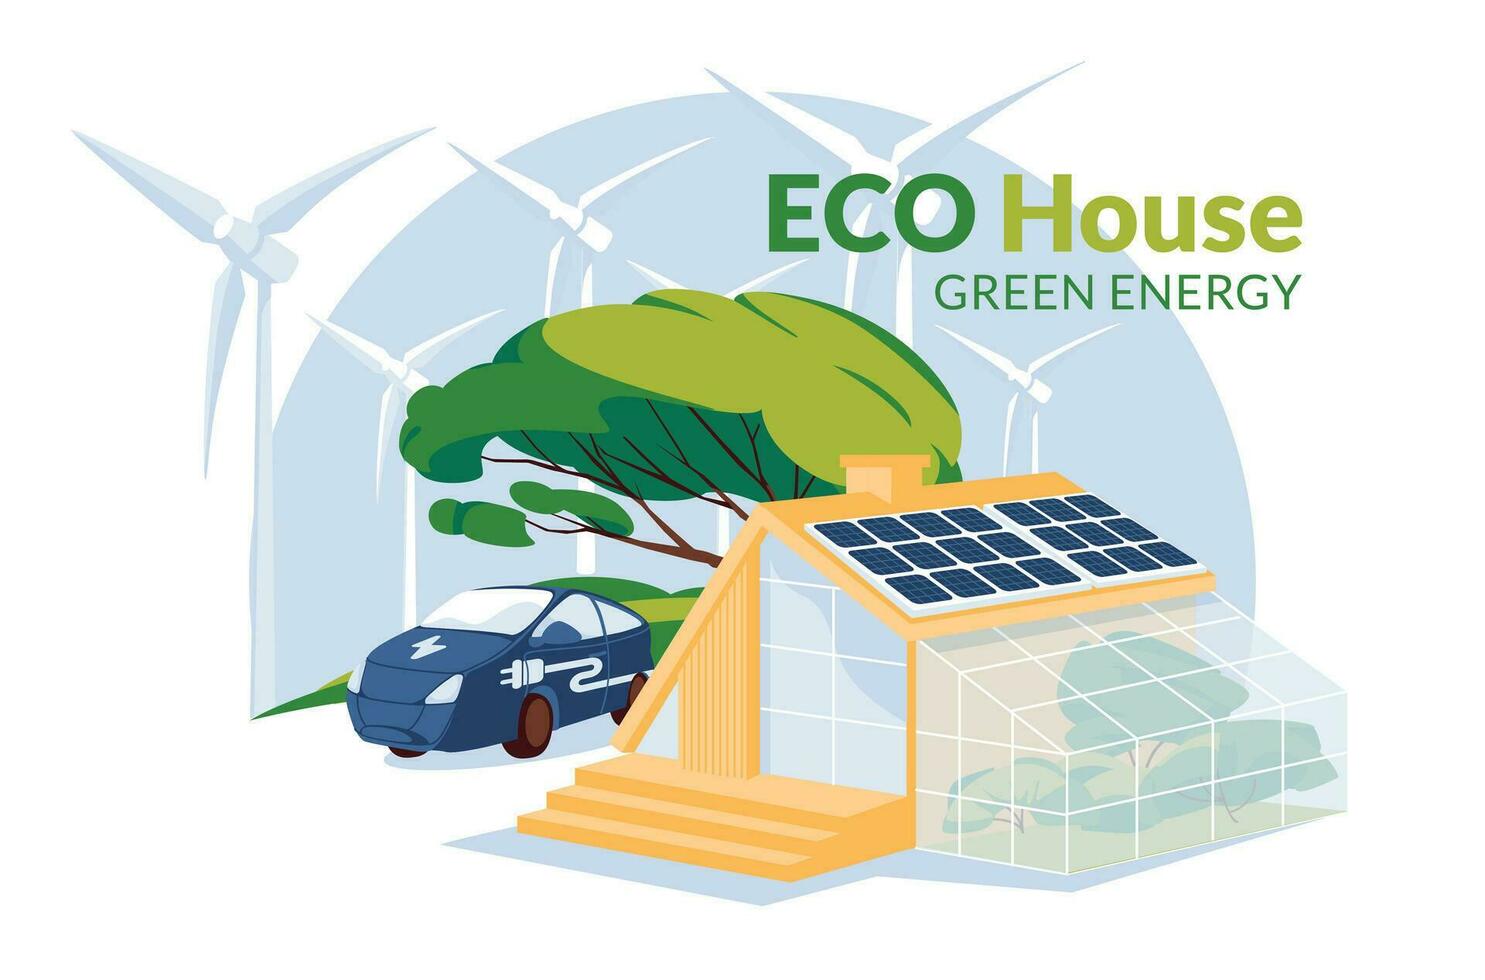 eco house with solar panels and electric car green energy concept. web icon and infographic. Recycle and renewble enerrgy home concept. Flat vector iluustration